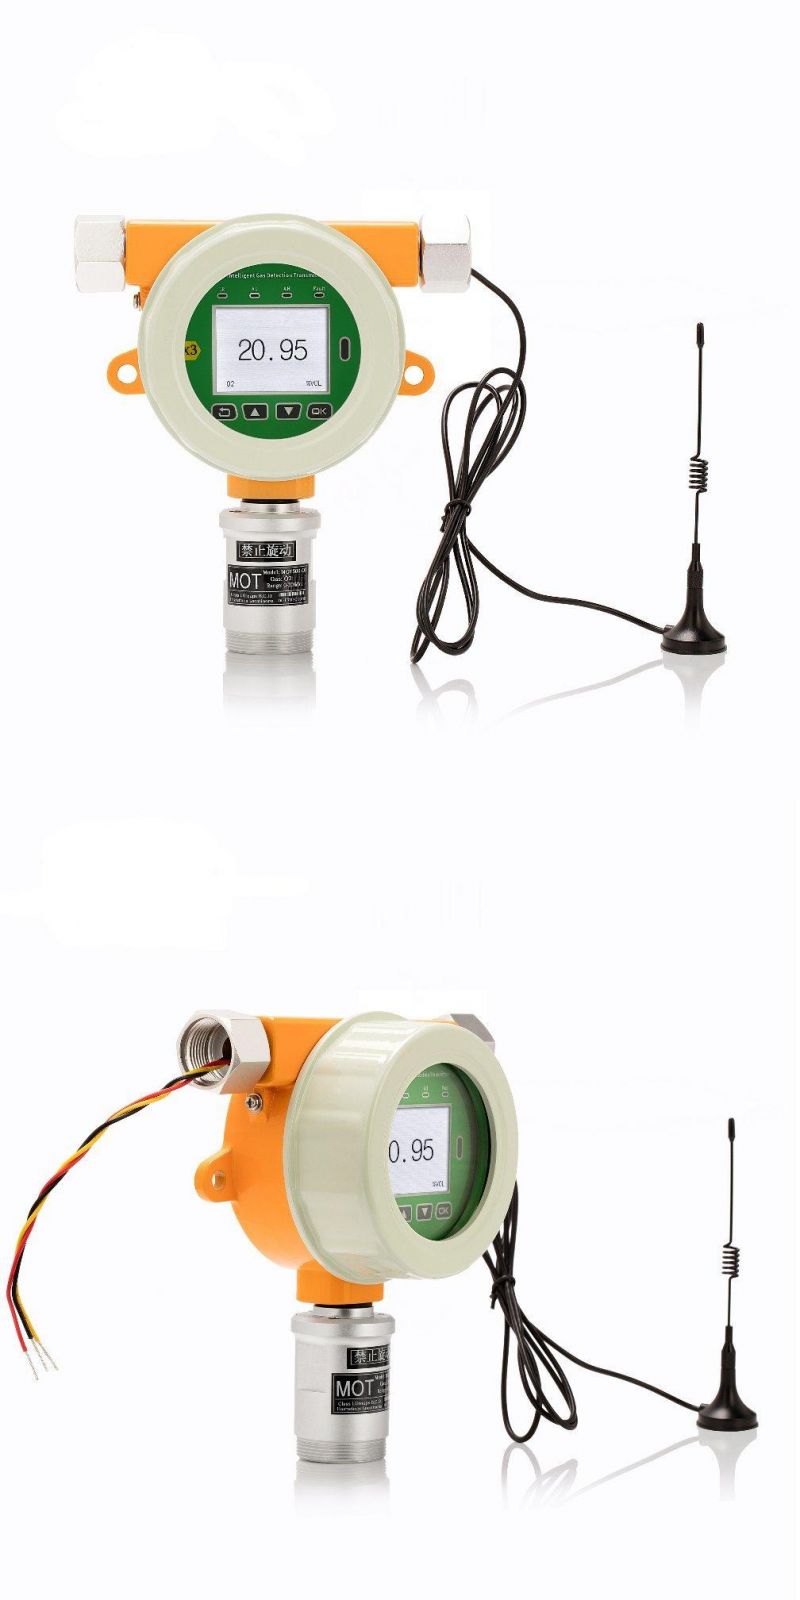 Wall Mounted Fixed Bromine Br2 Gas Detector with Wireless Transmitter